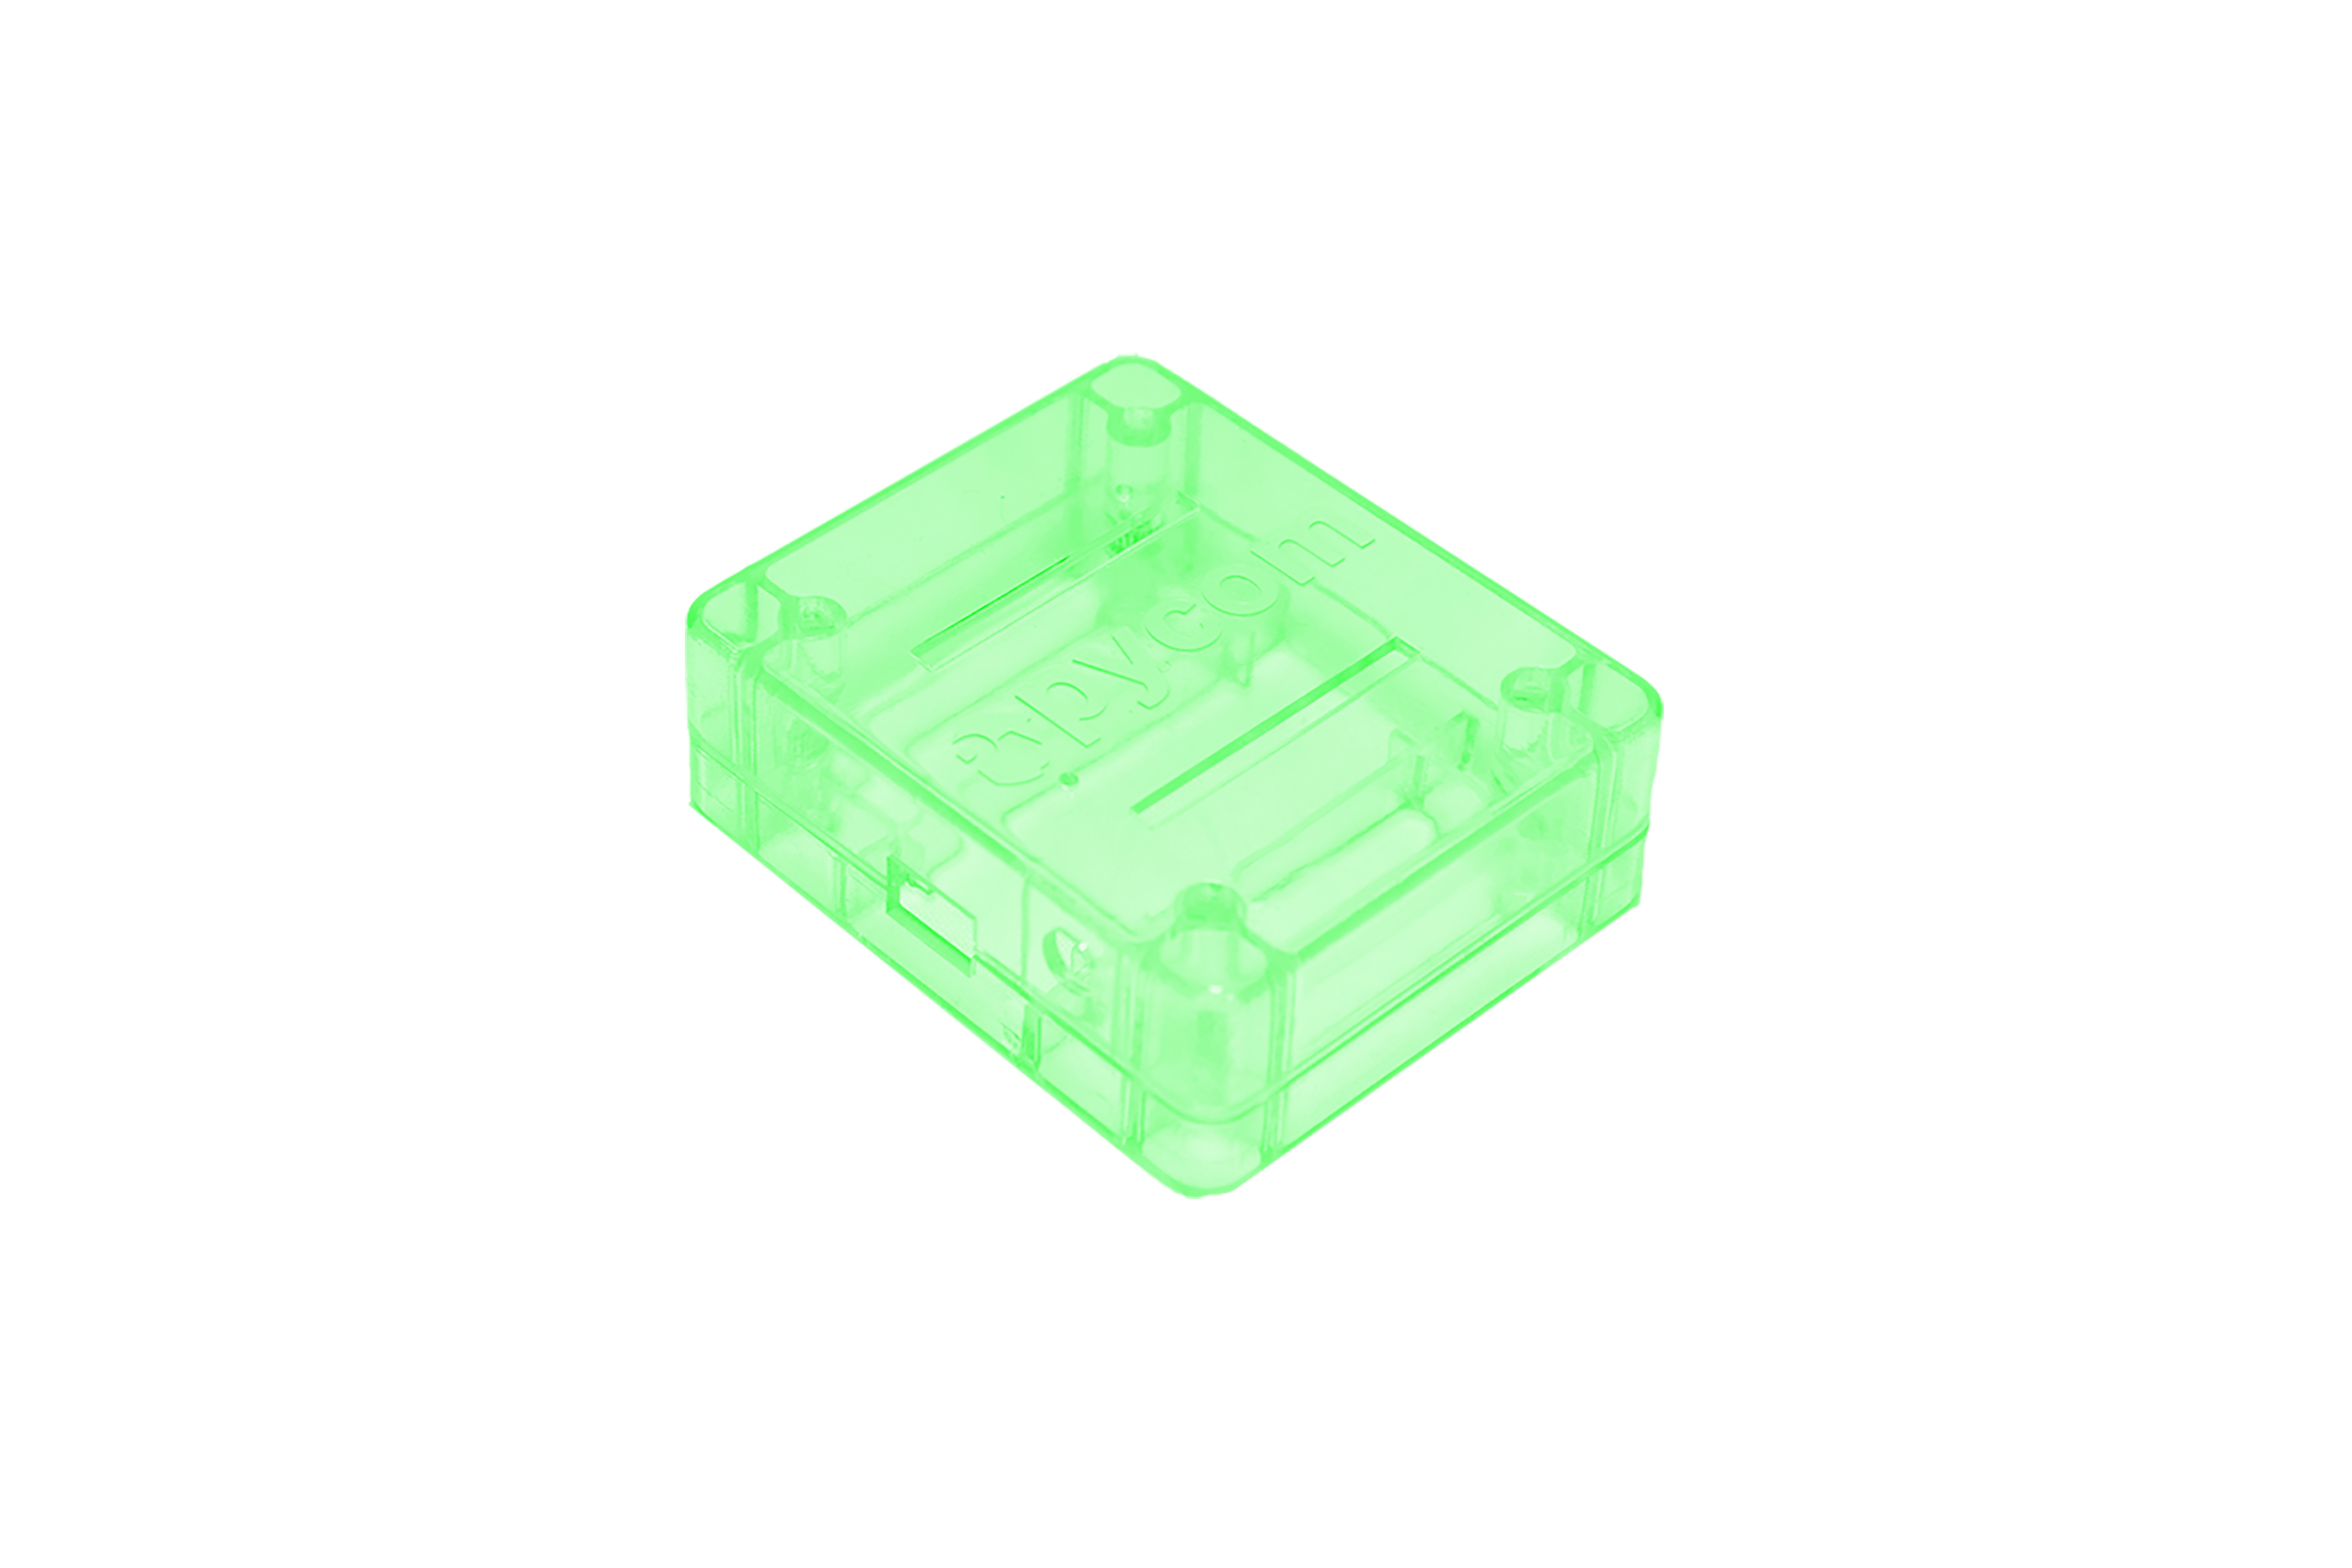 Case For Wipy/Lopy/Sipy Boards - Green